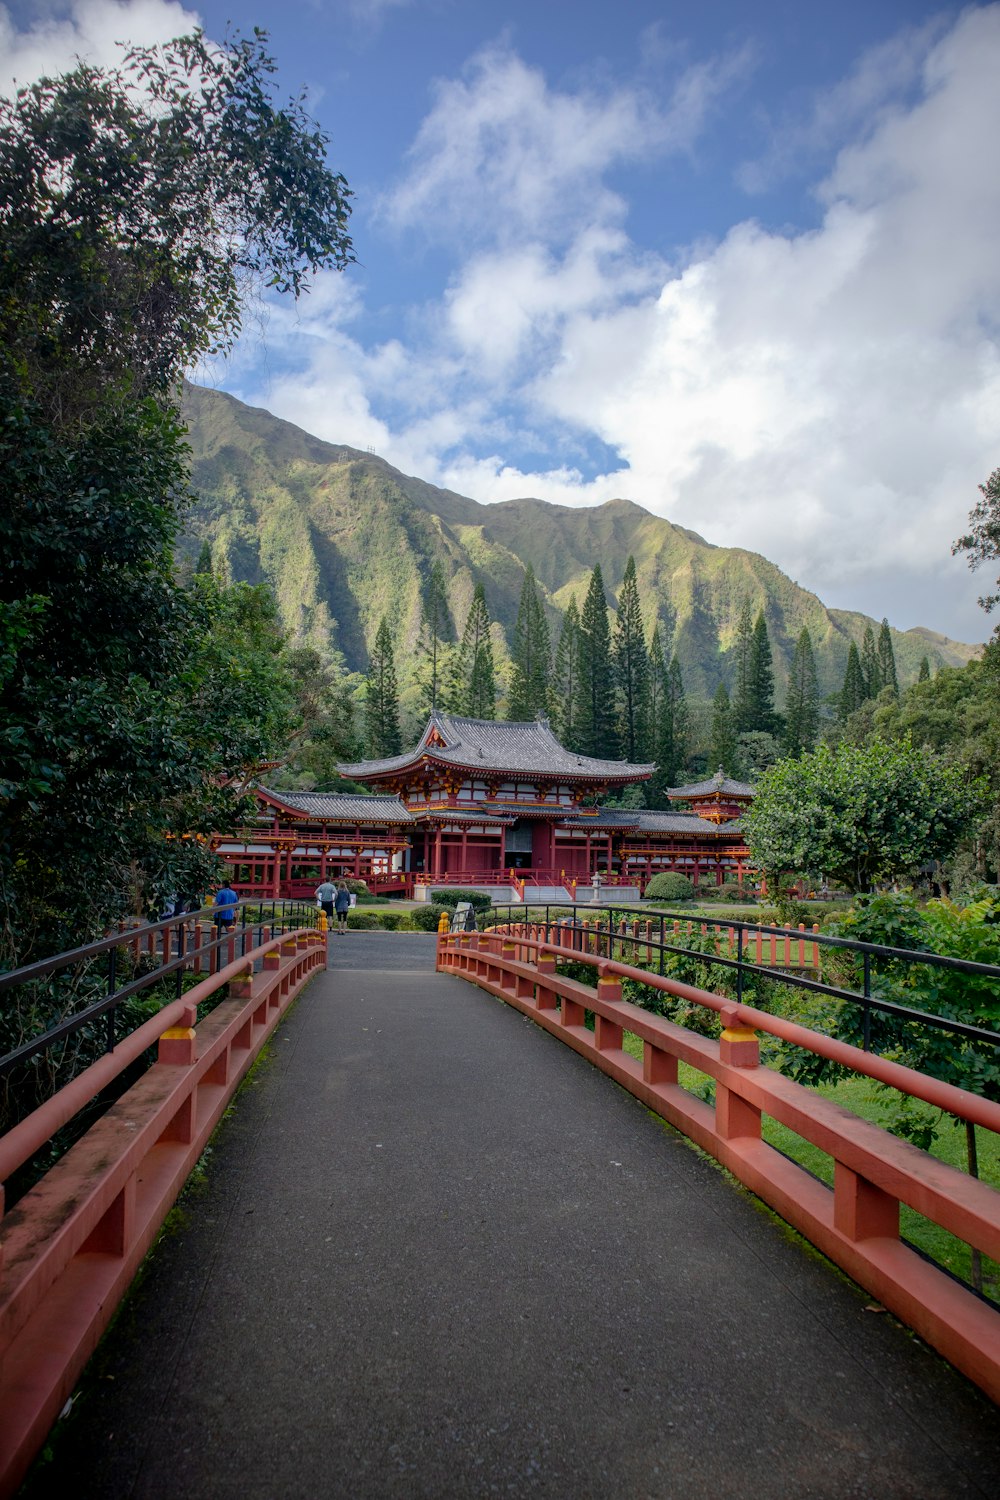 red and brown wooden bridge near green trees and mountain during daytime